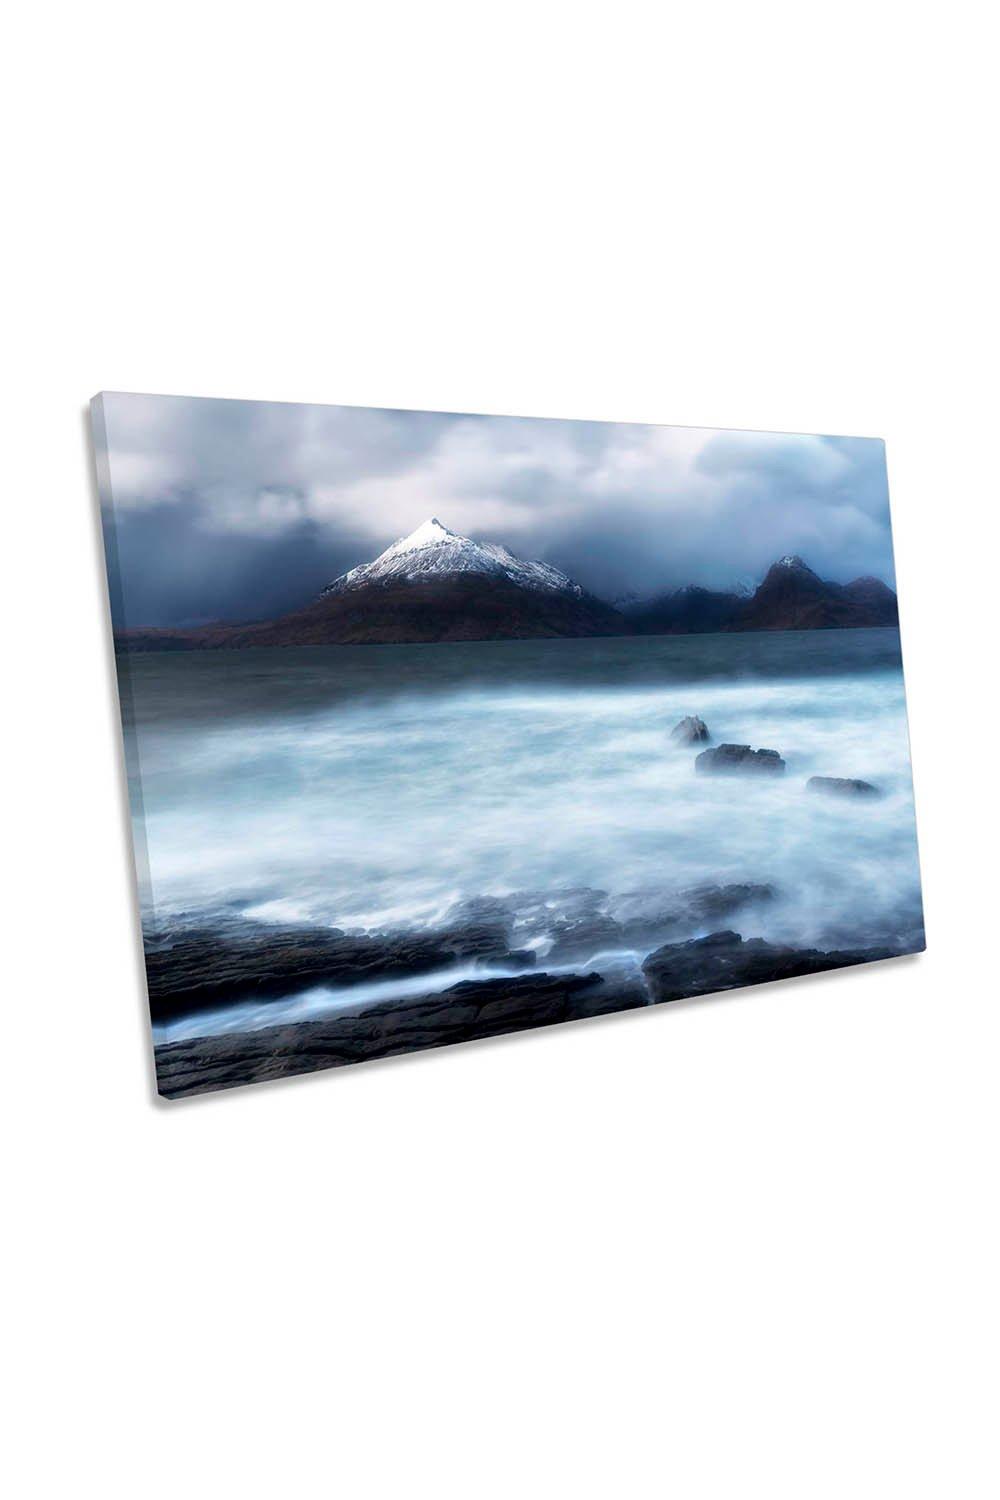 Stormy Elgol Rocky Mountains Landscape Canvas Wall Art Picture Print